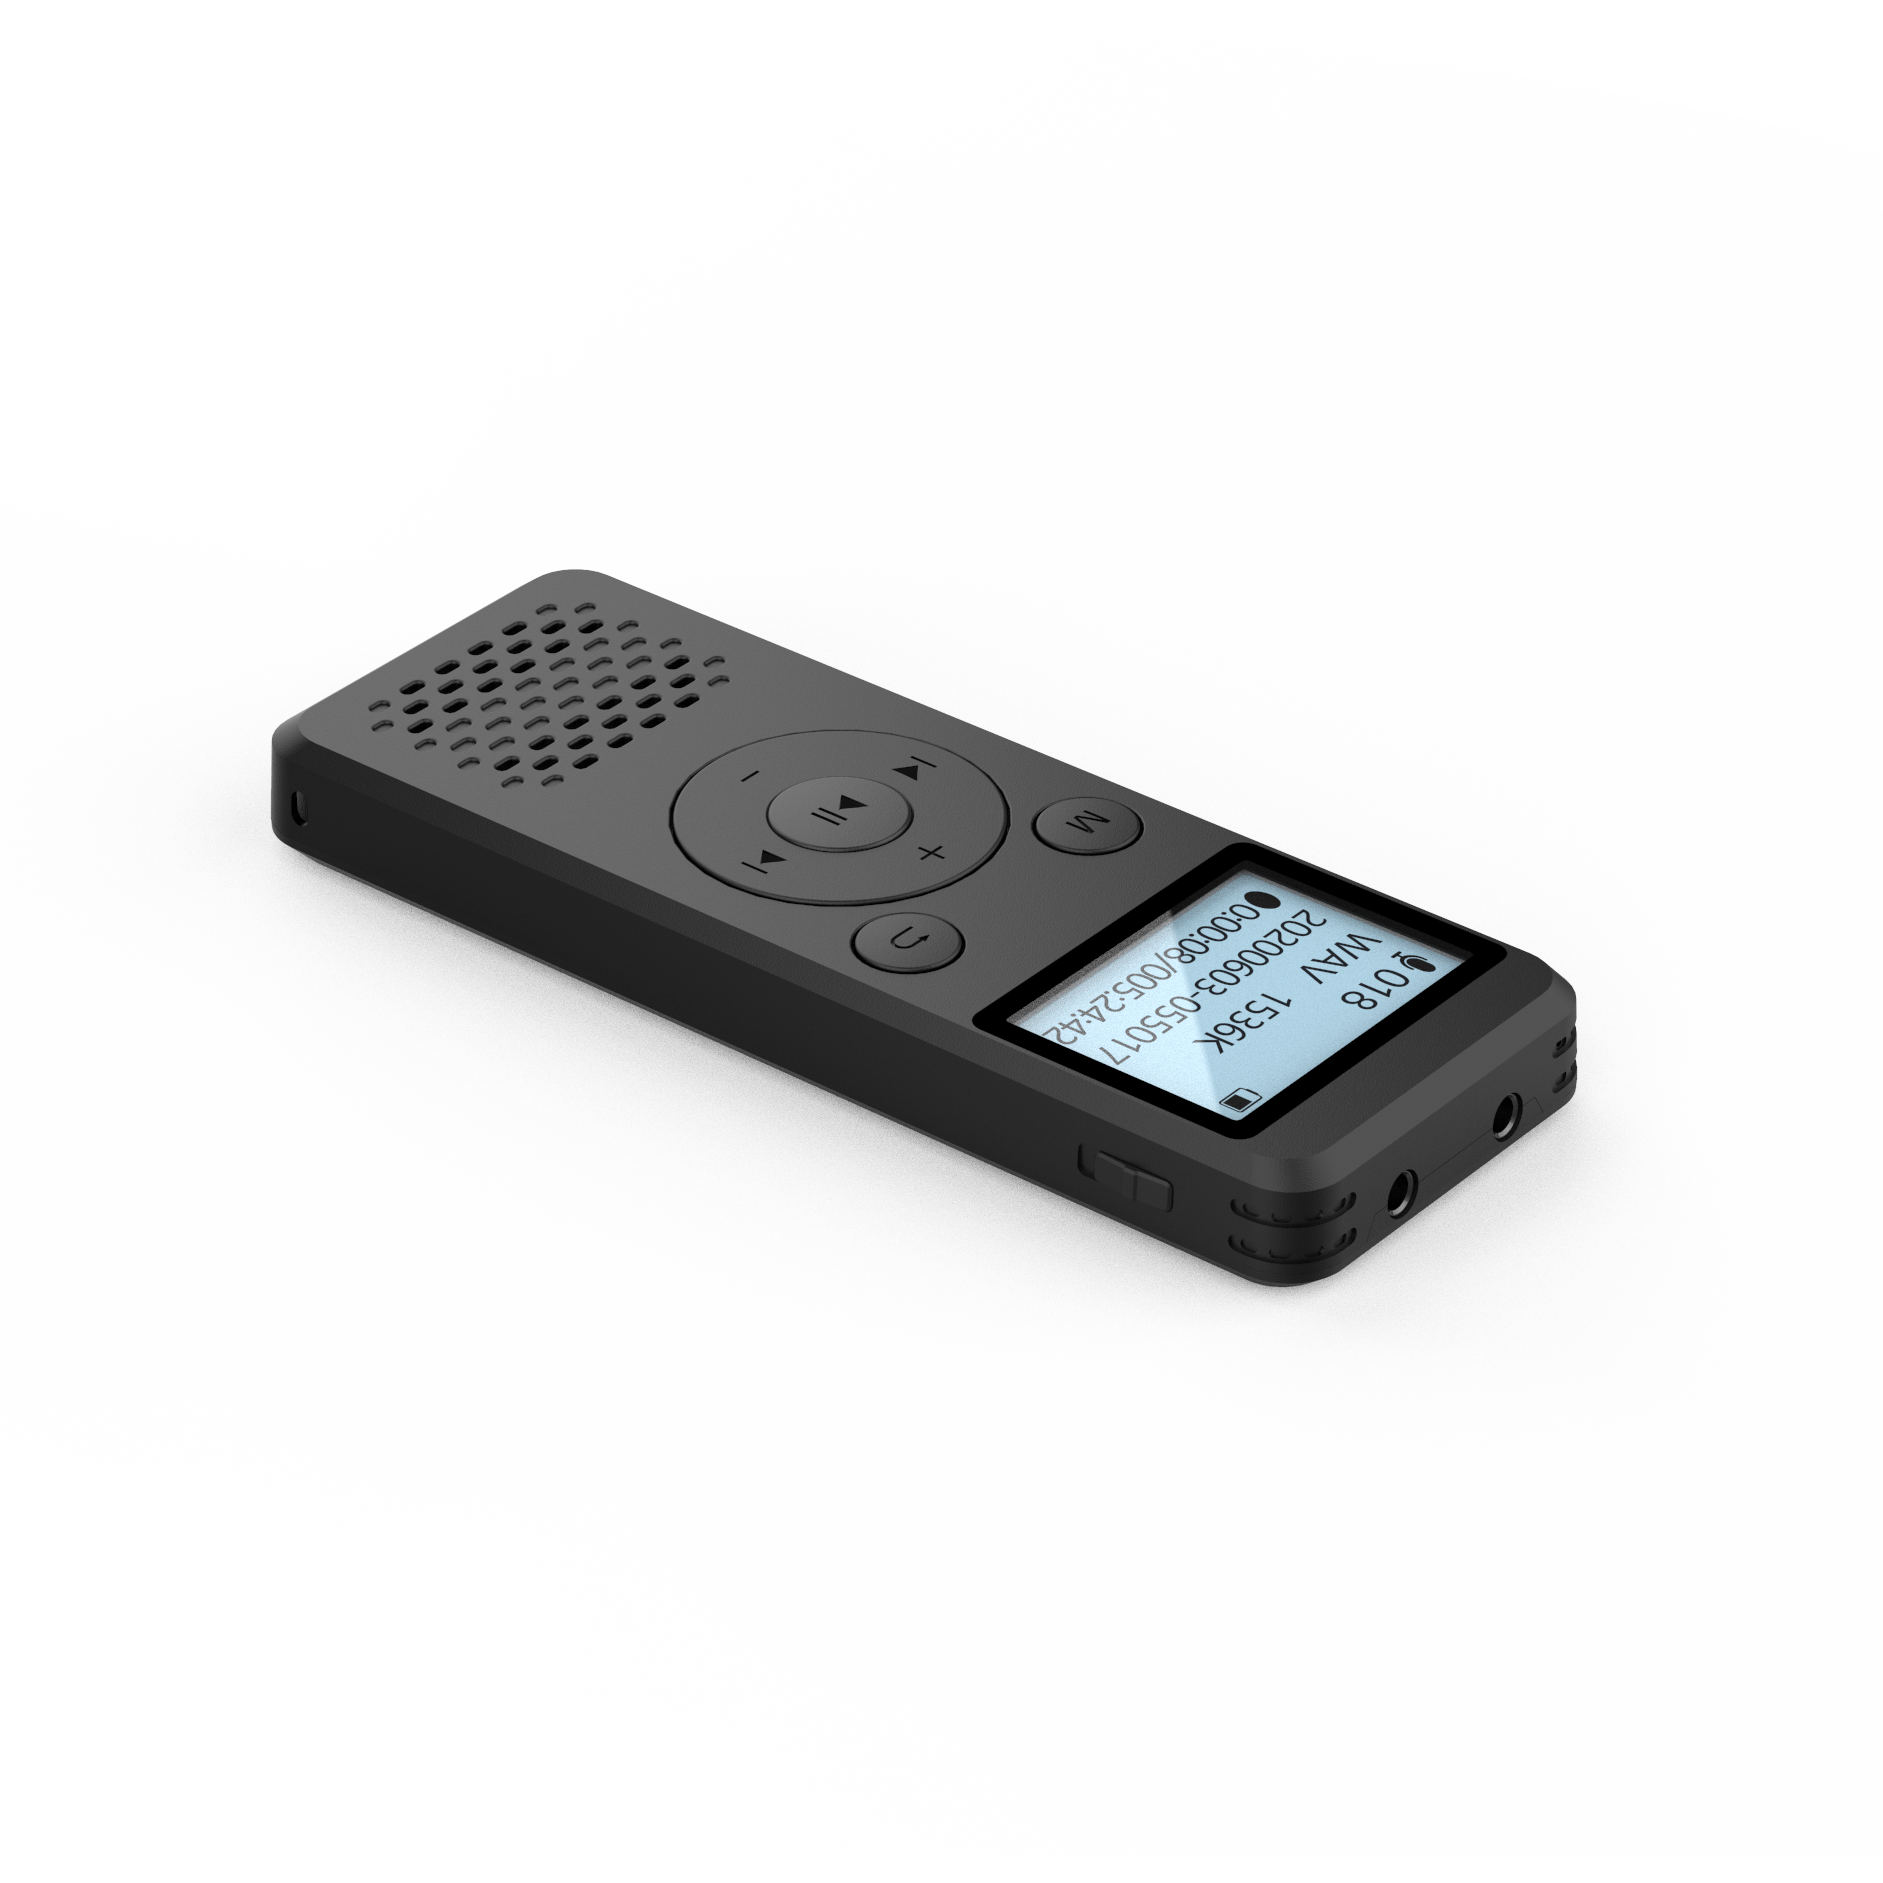 product-Hnsat-Digital Voice Recorder Spy Voice Recorder Built in 8GB Flash Memory Telephone Recordin